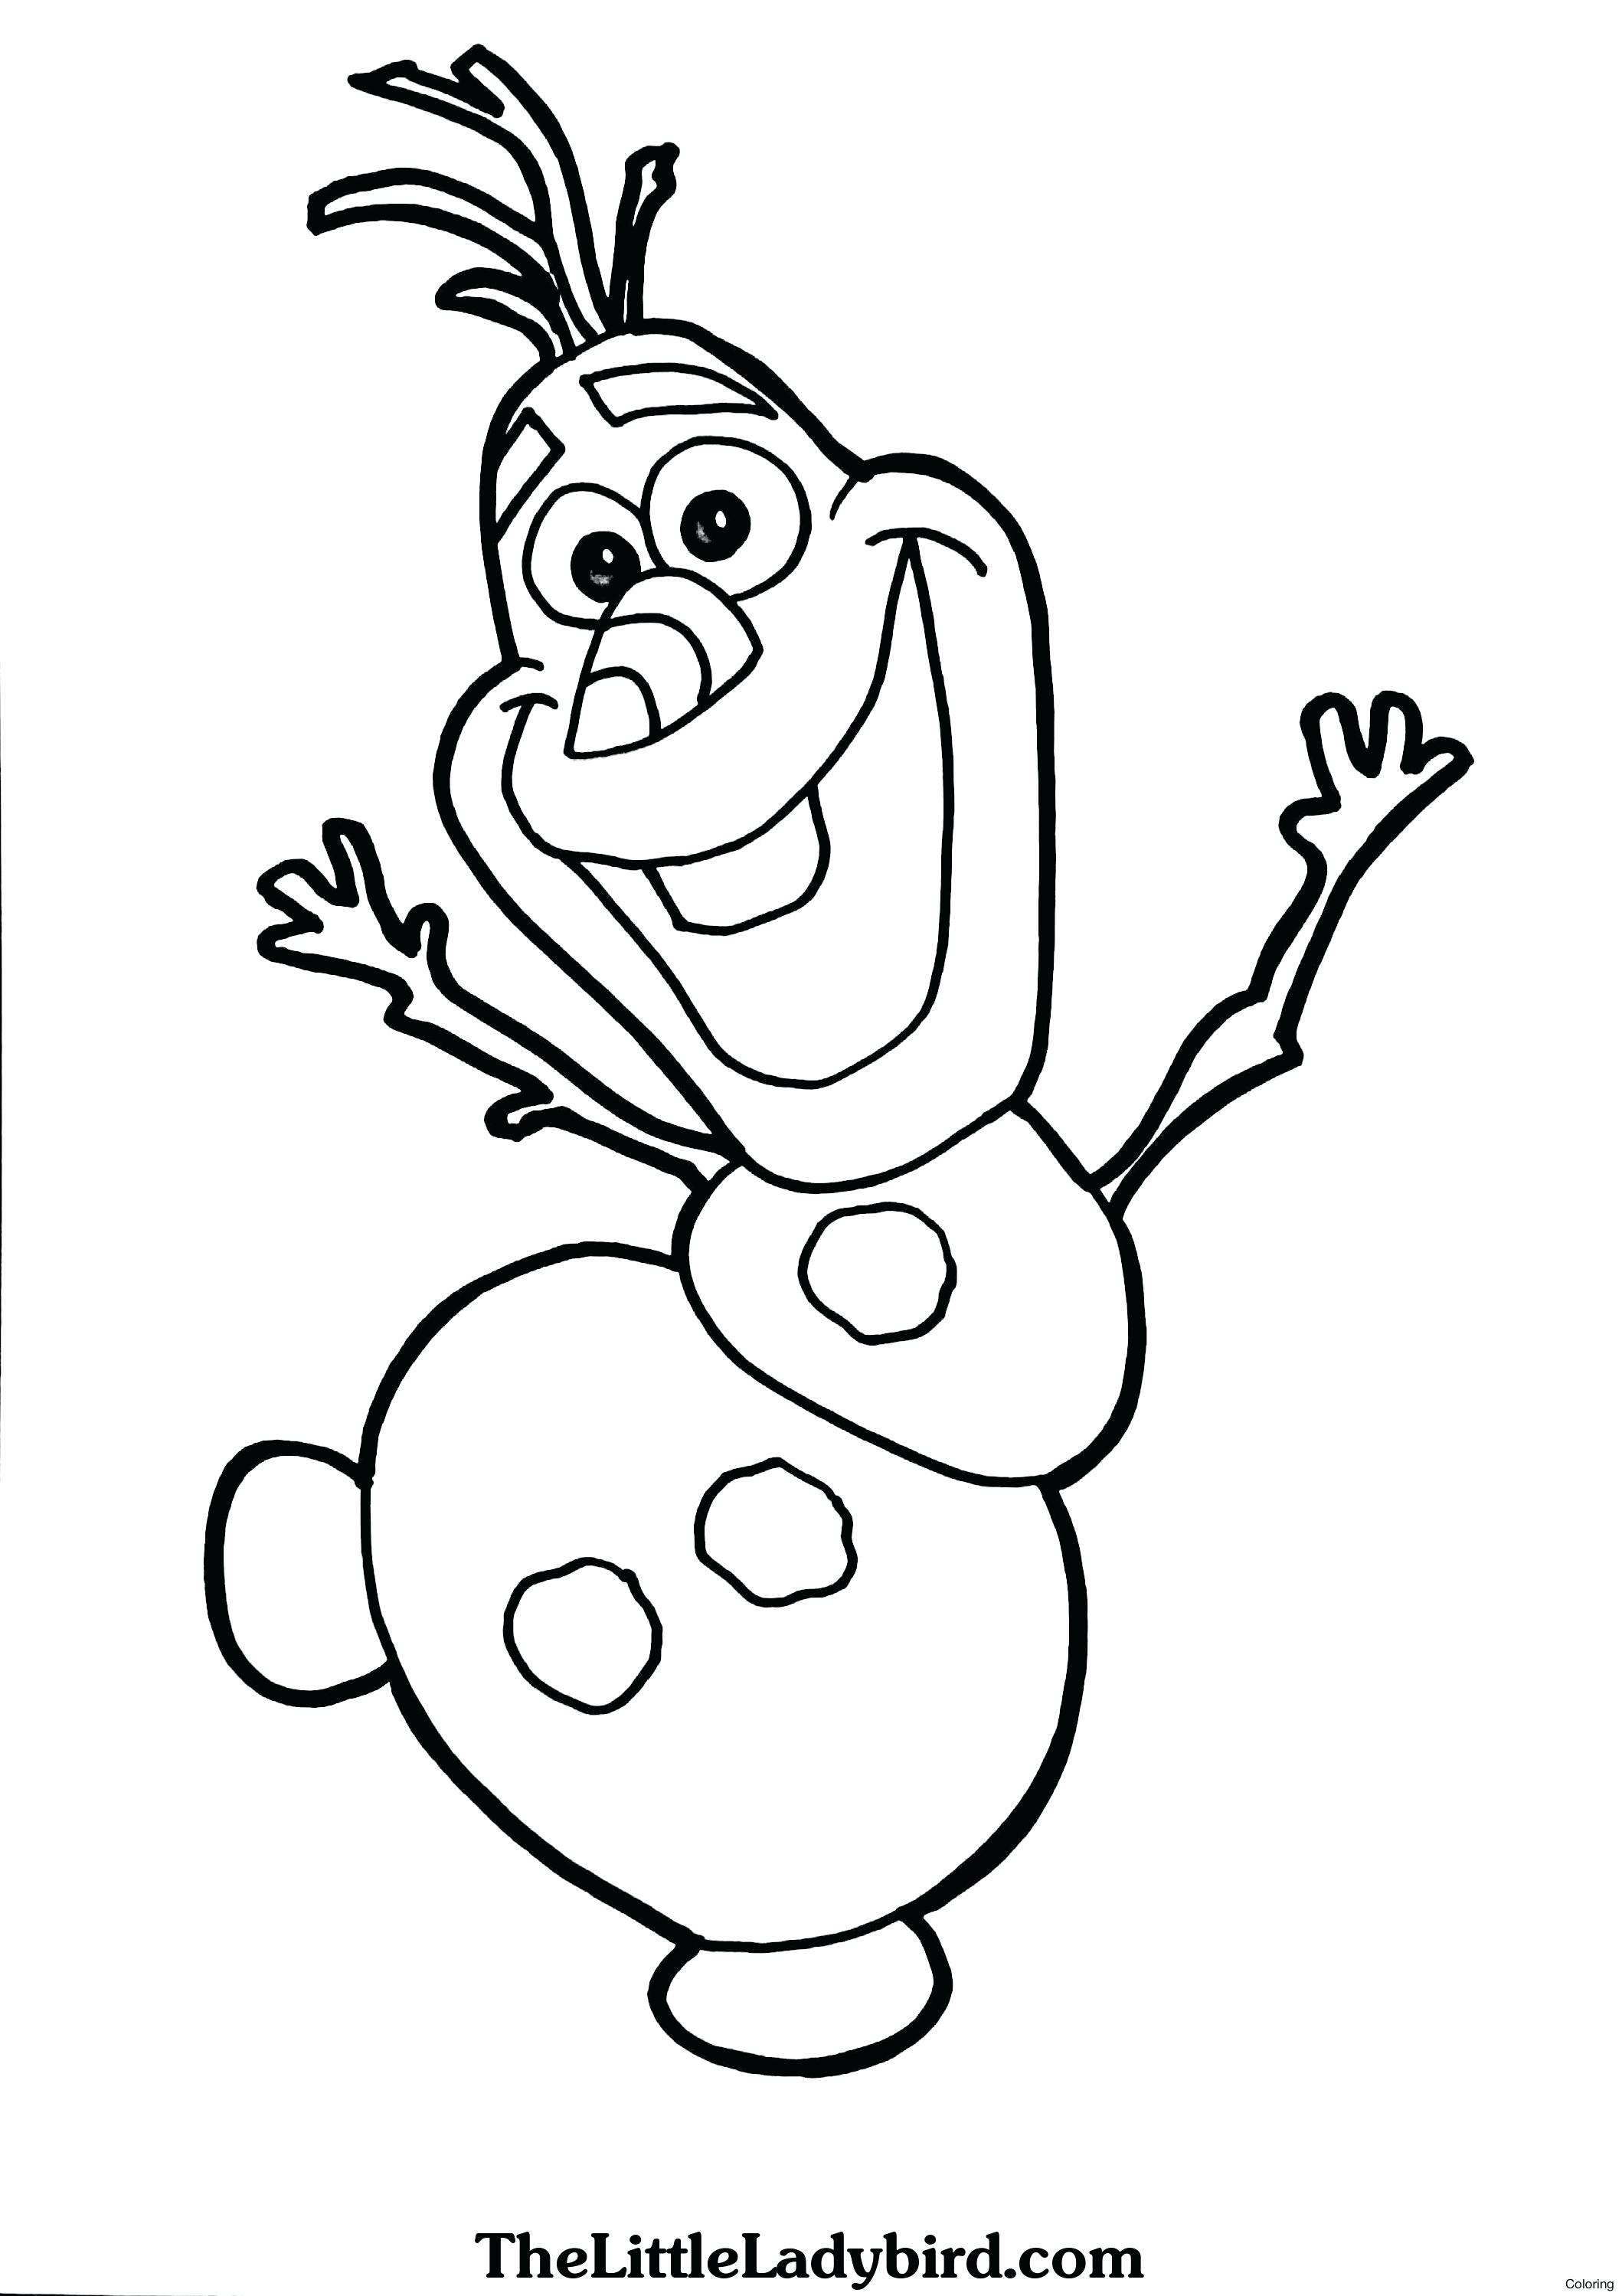 olaf-from-frozen-drawing-at-getdrawings-free-download